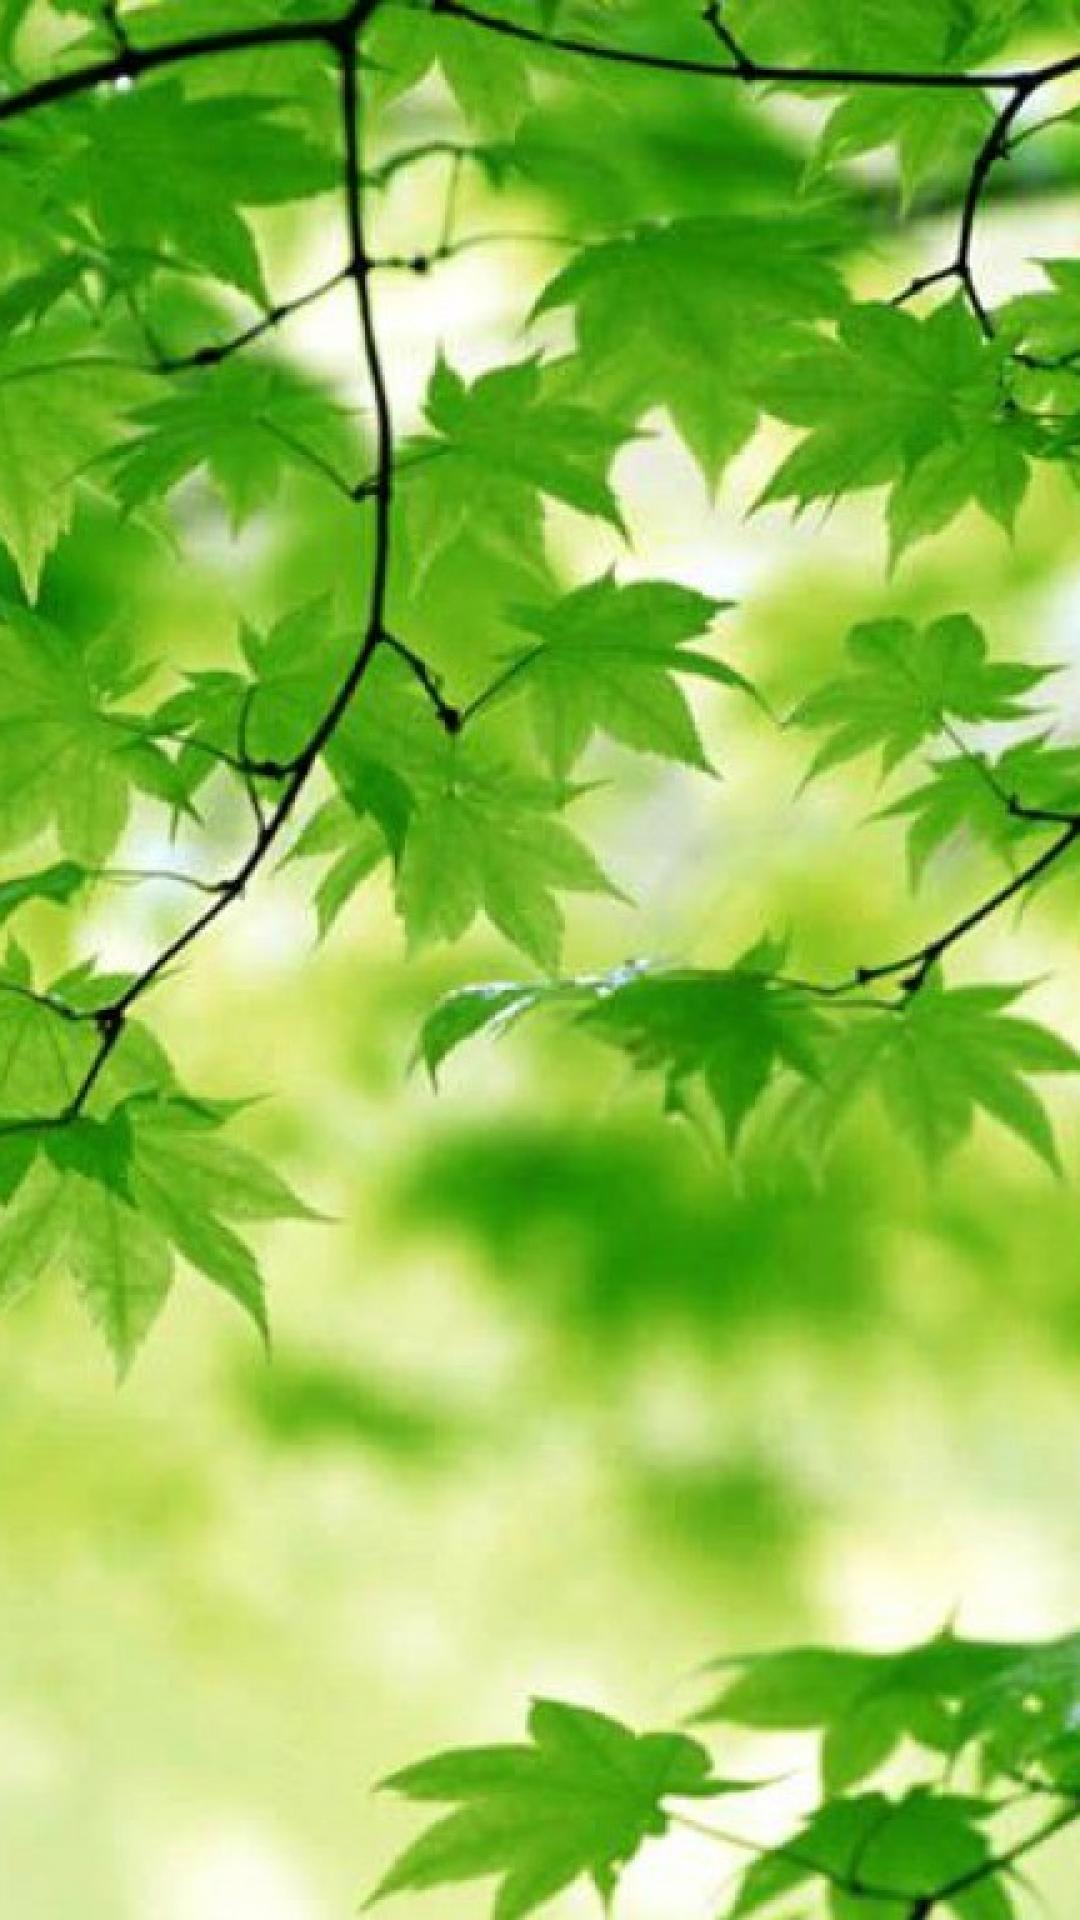 nature wallpaper hd for mobile,leaf,green,tree,branch,plant